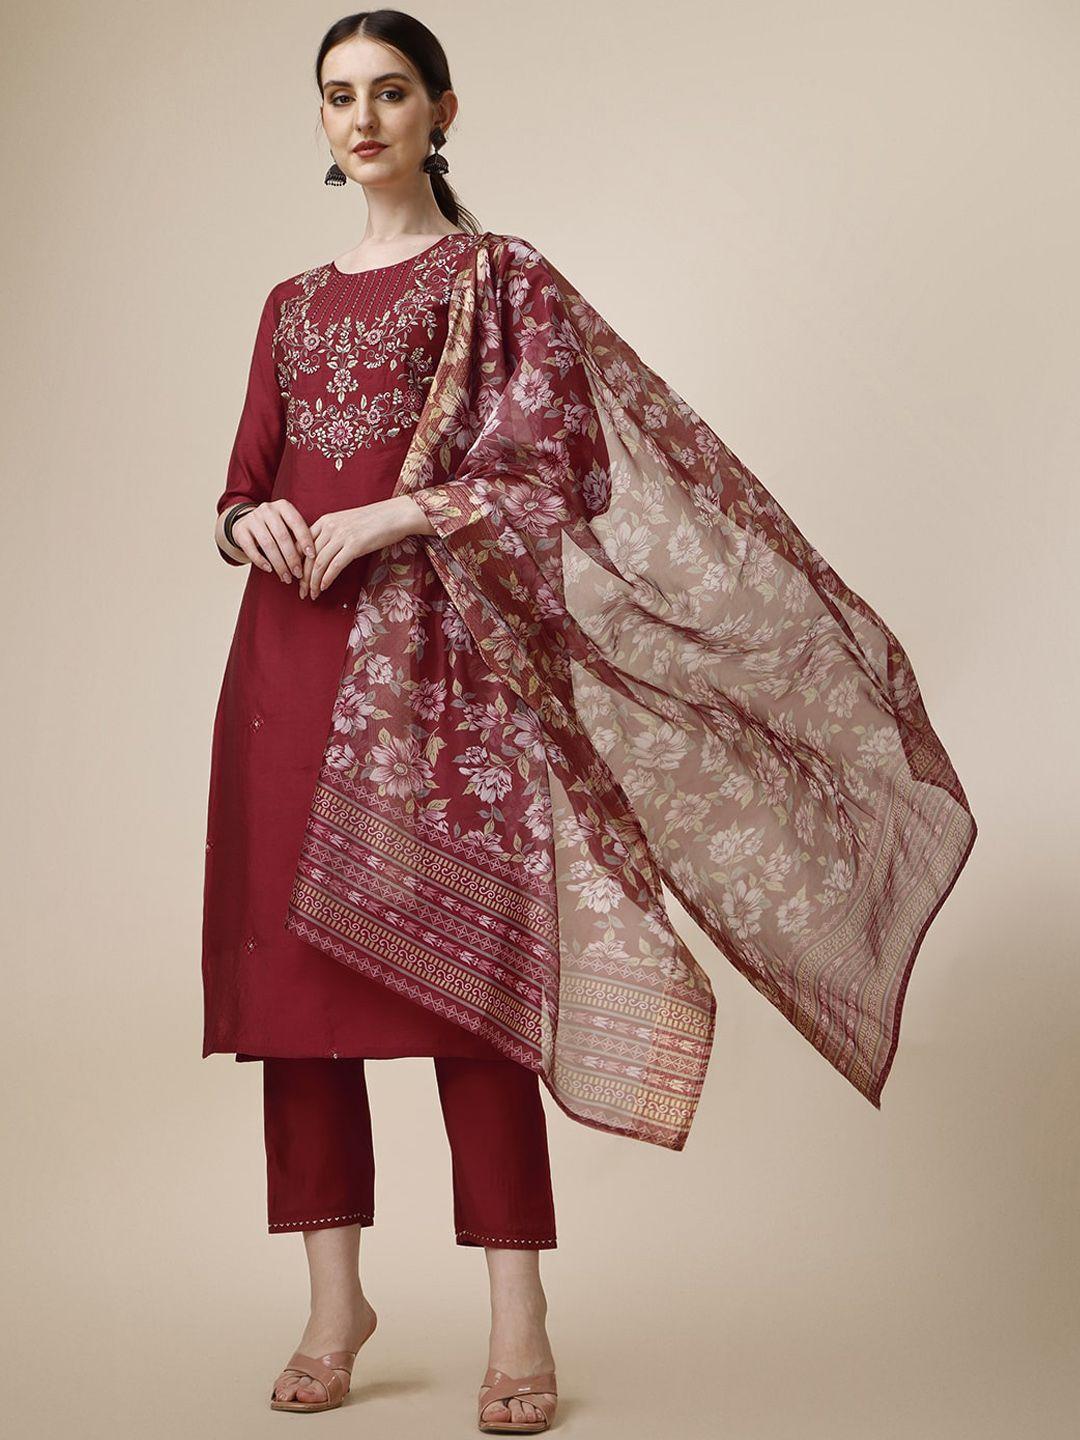 berrylicious floral embroidered regular chanderi cotton kurta with trousers & dupatta